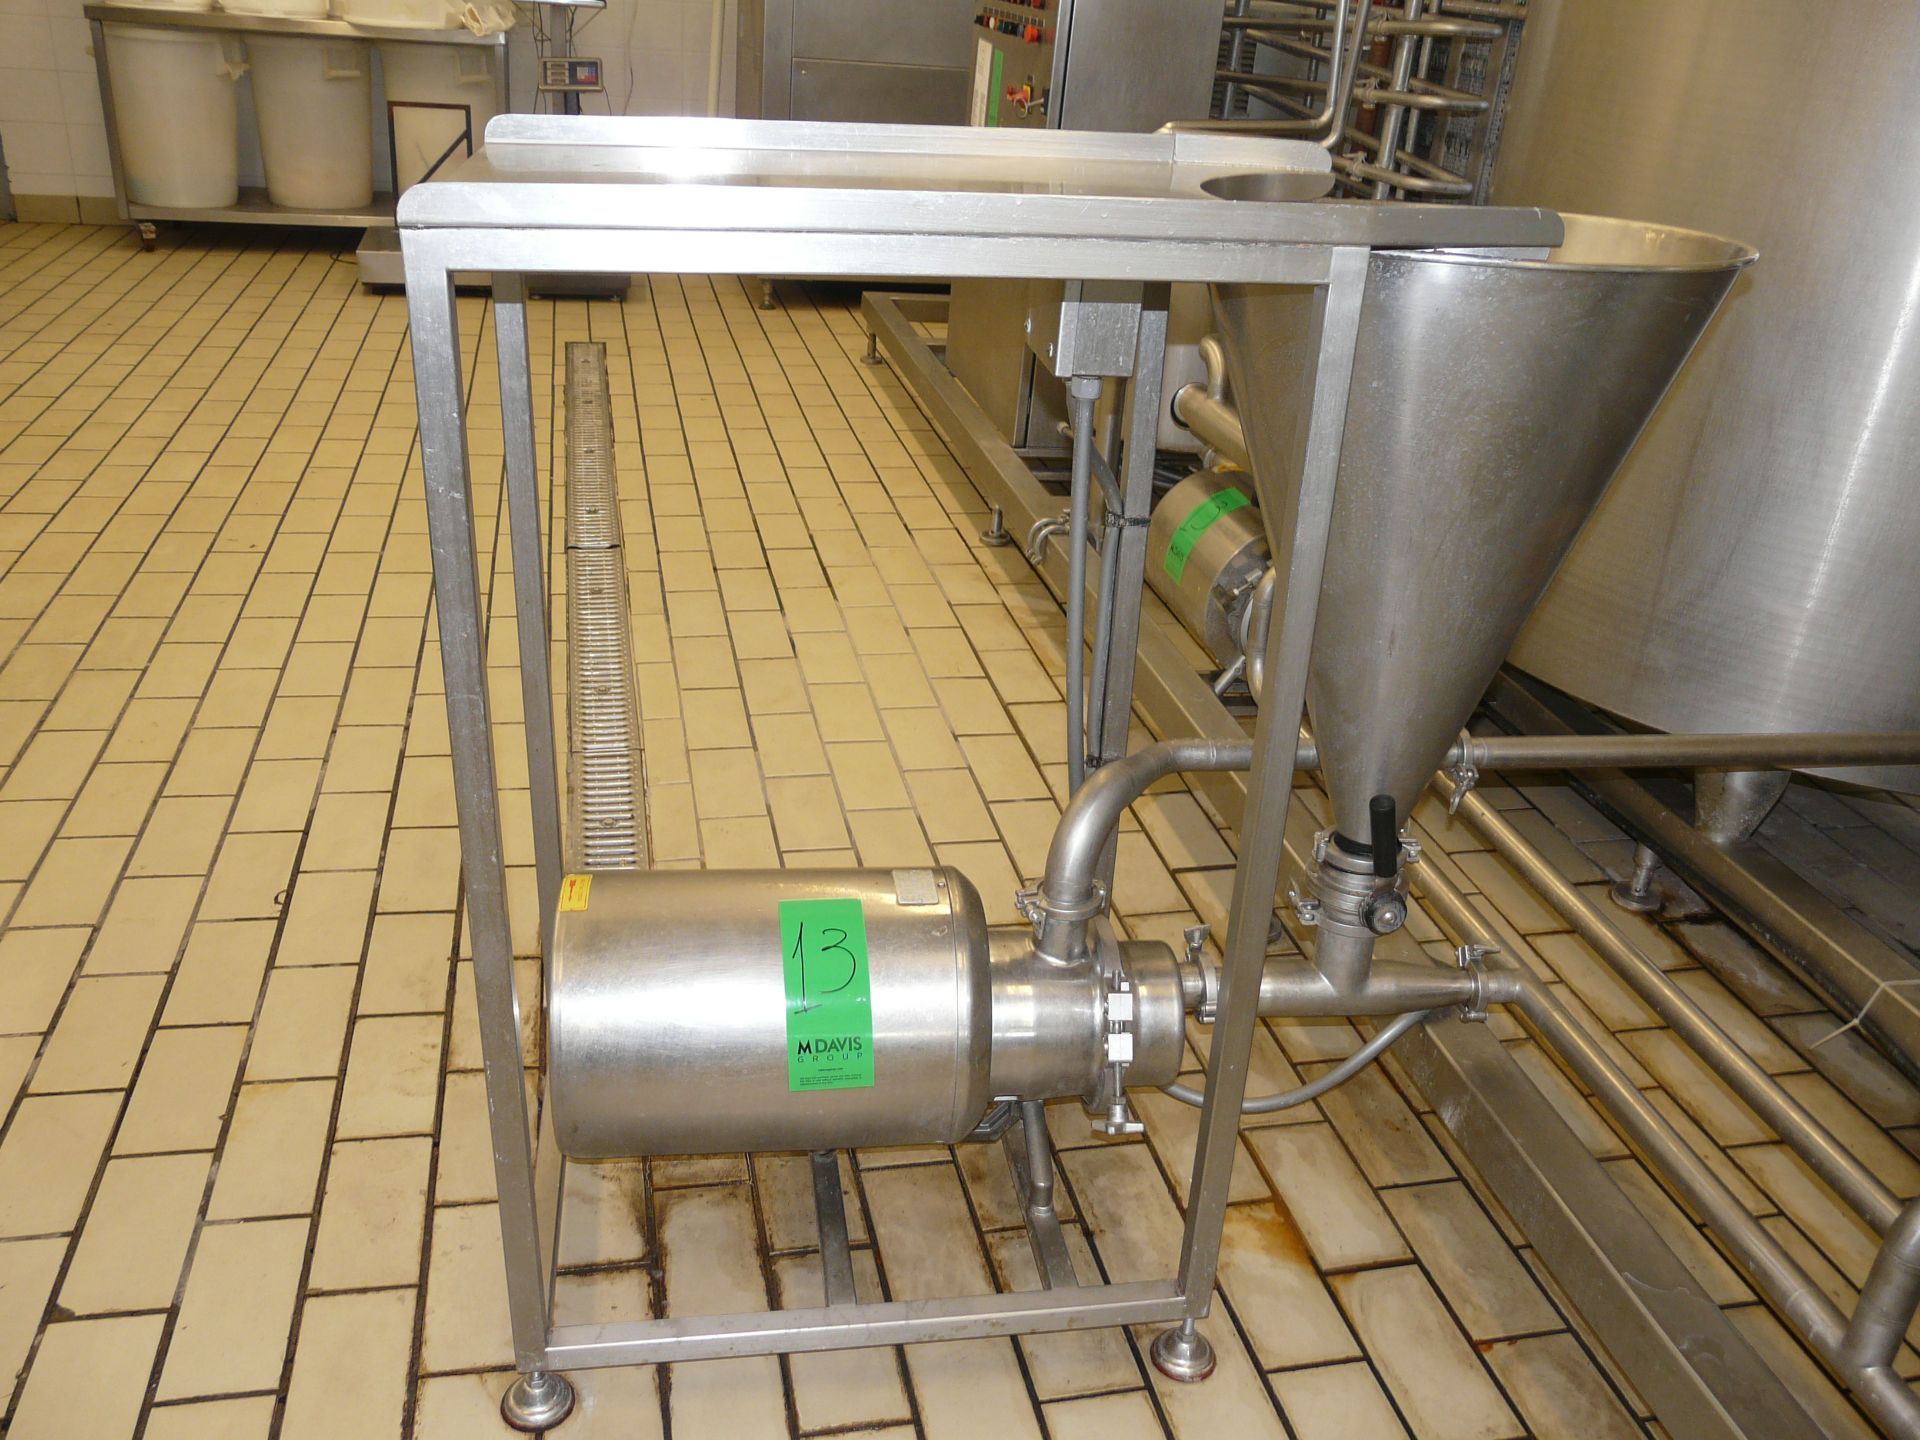 English: TETRA PAK HOYER HTST SYSTEM, 1200 Pasteurizer for Ice Cream, Contains 2 x Tanks with - Image 41 of 45